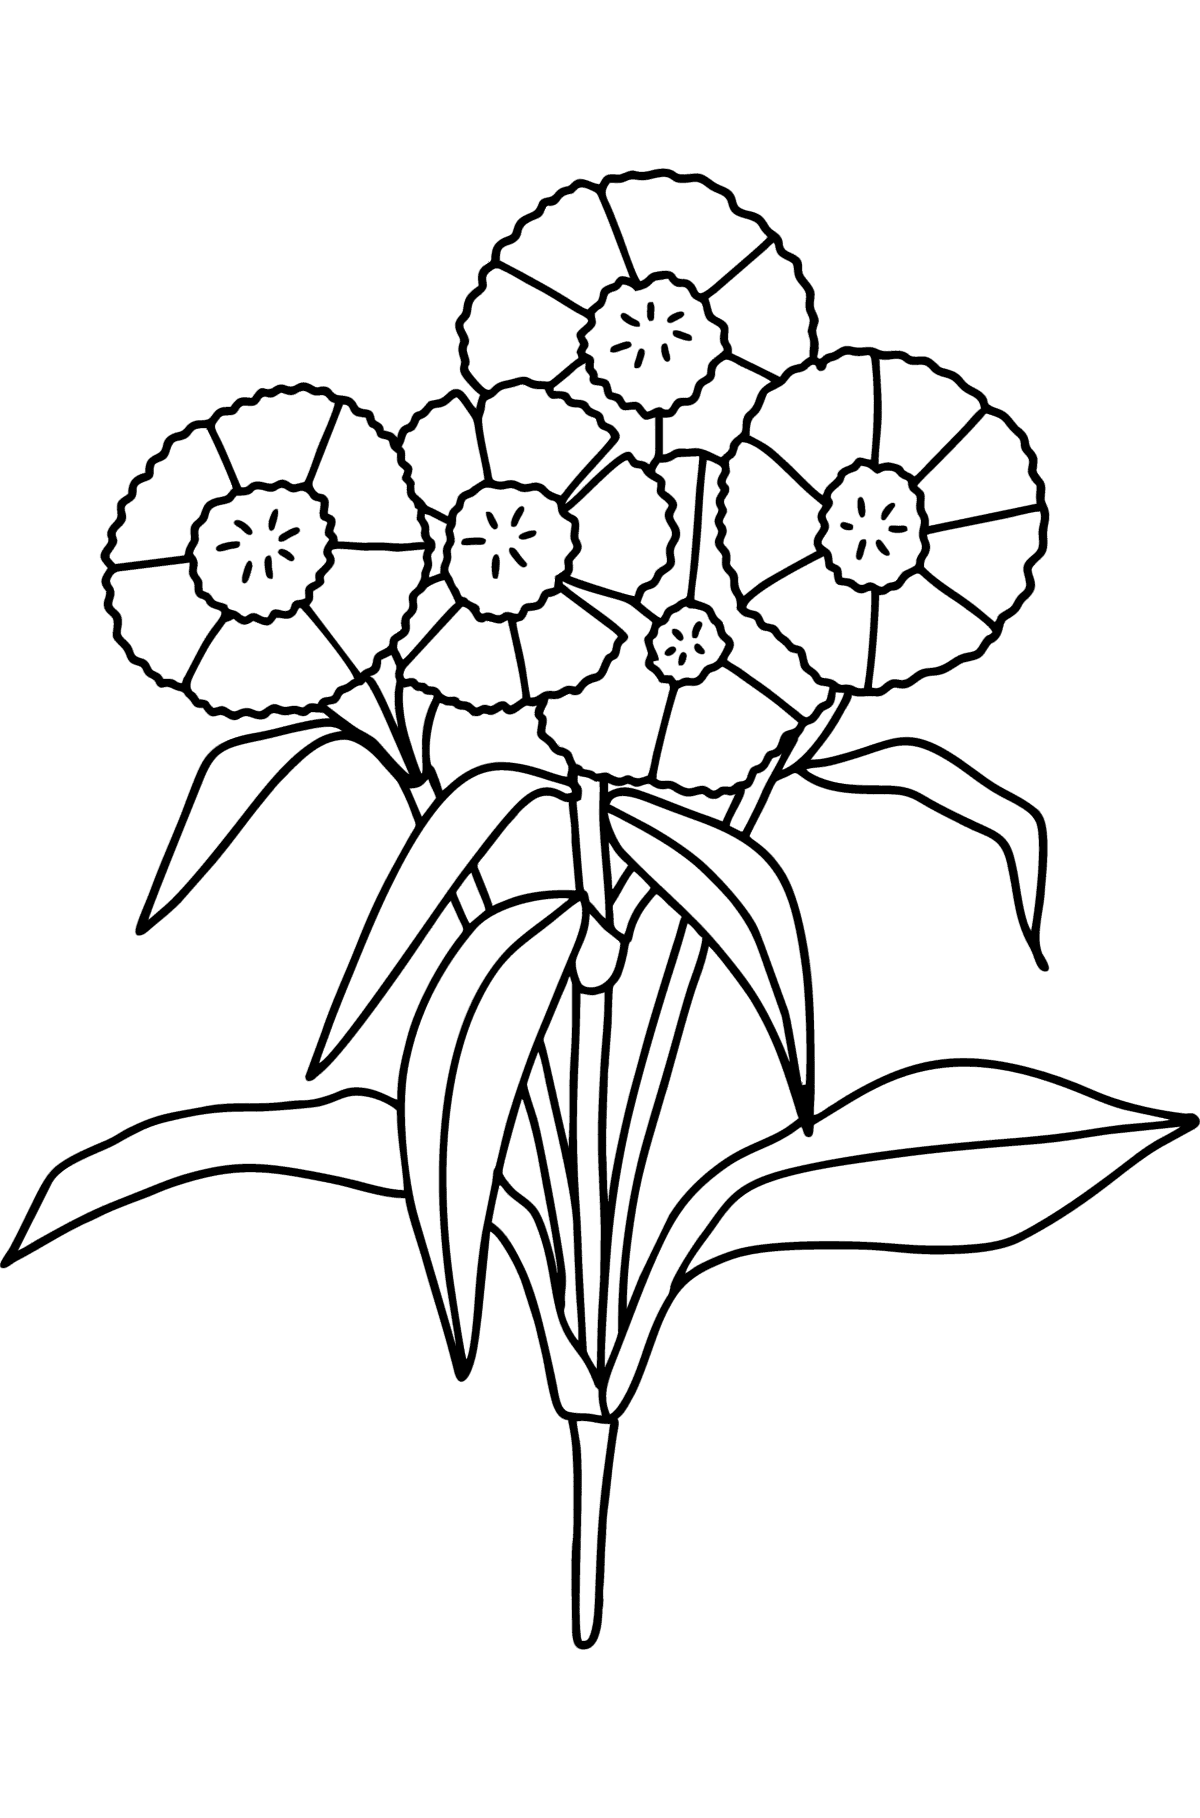 Carnations coloring page - Coloring Pages for Kids